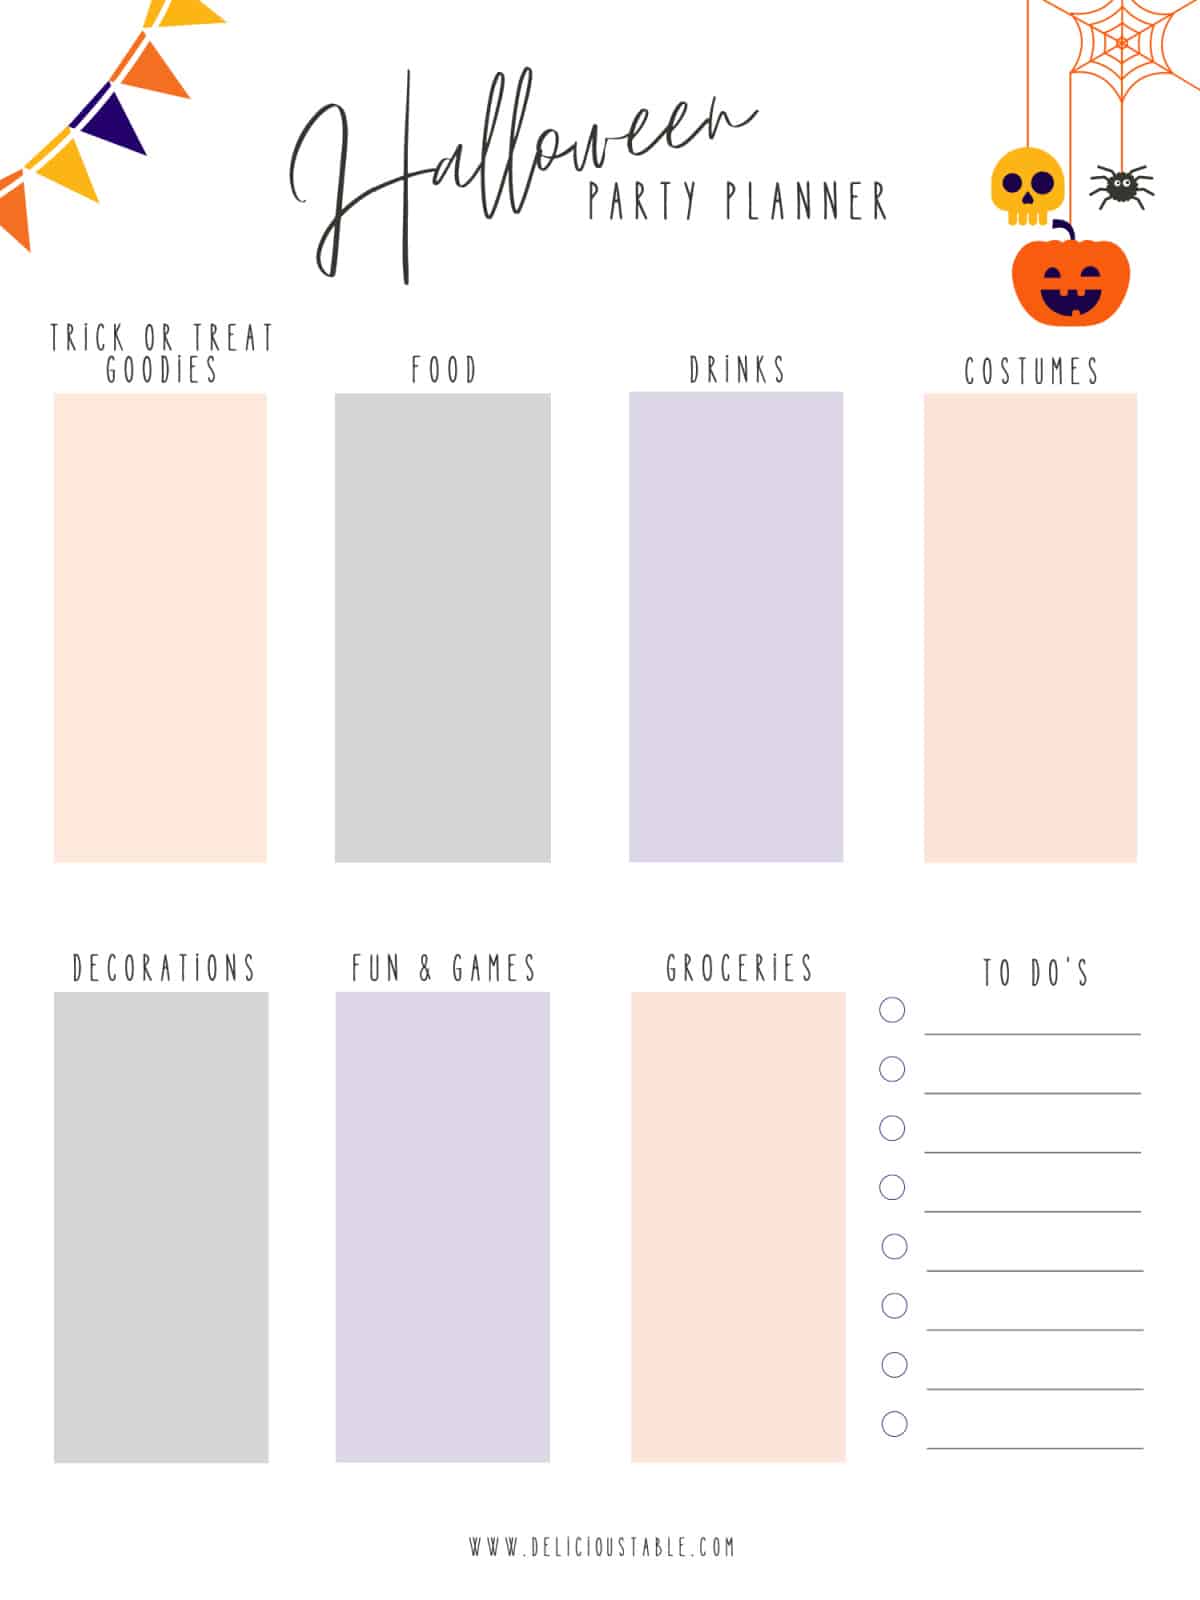 A two page Halloween planner to plan the best food and decorations for a Halloween party.